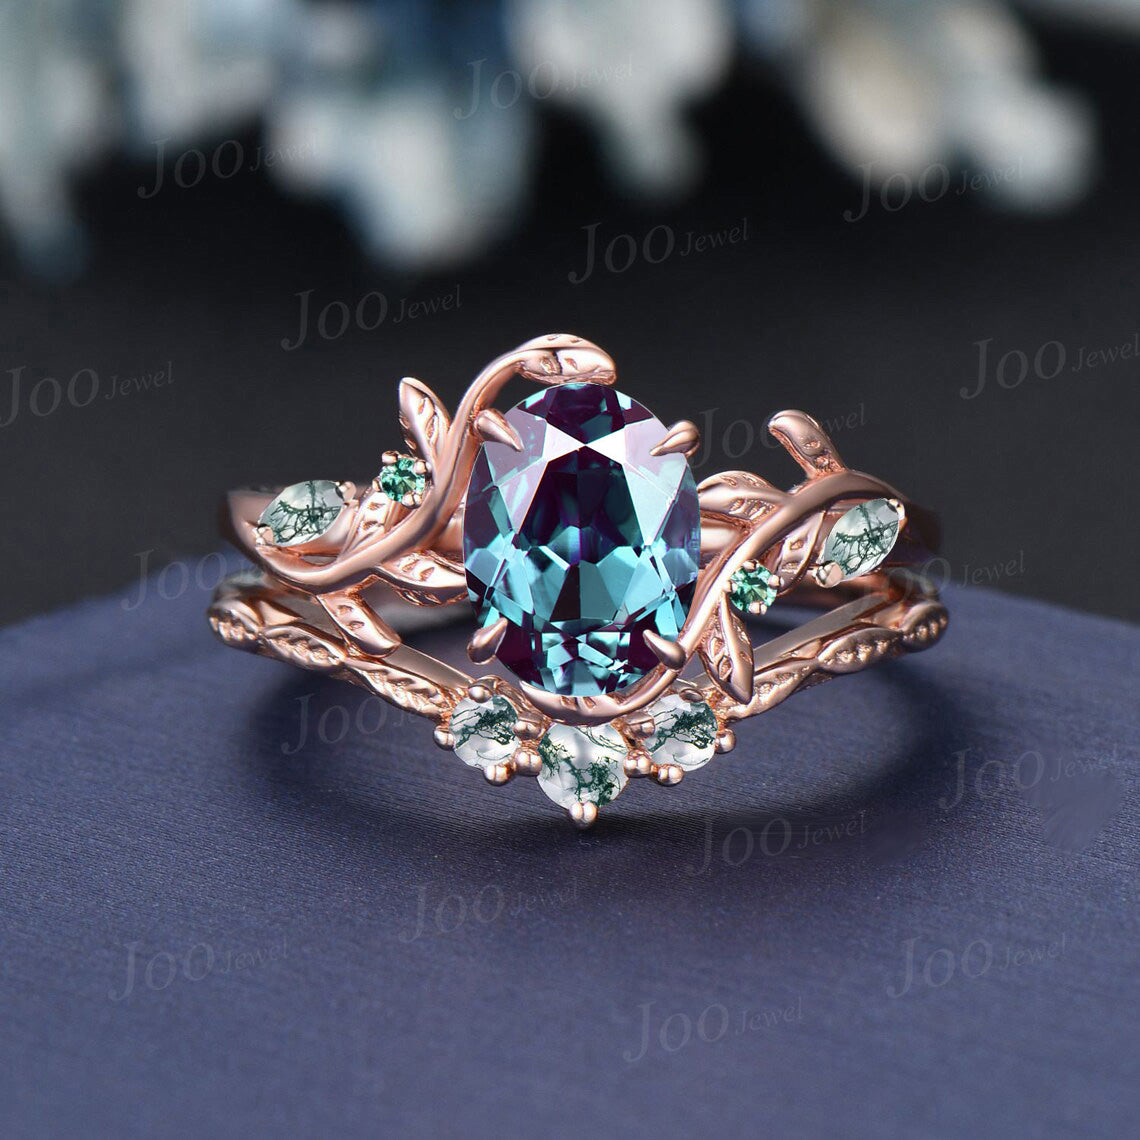 1.5ct Oval Alexandrite Moss Agate Bridal Ring Set Branch Leaf Vine Color-Change Alexandrite Engagement Ring Unique Wedding Anniversary Gifts